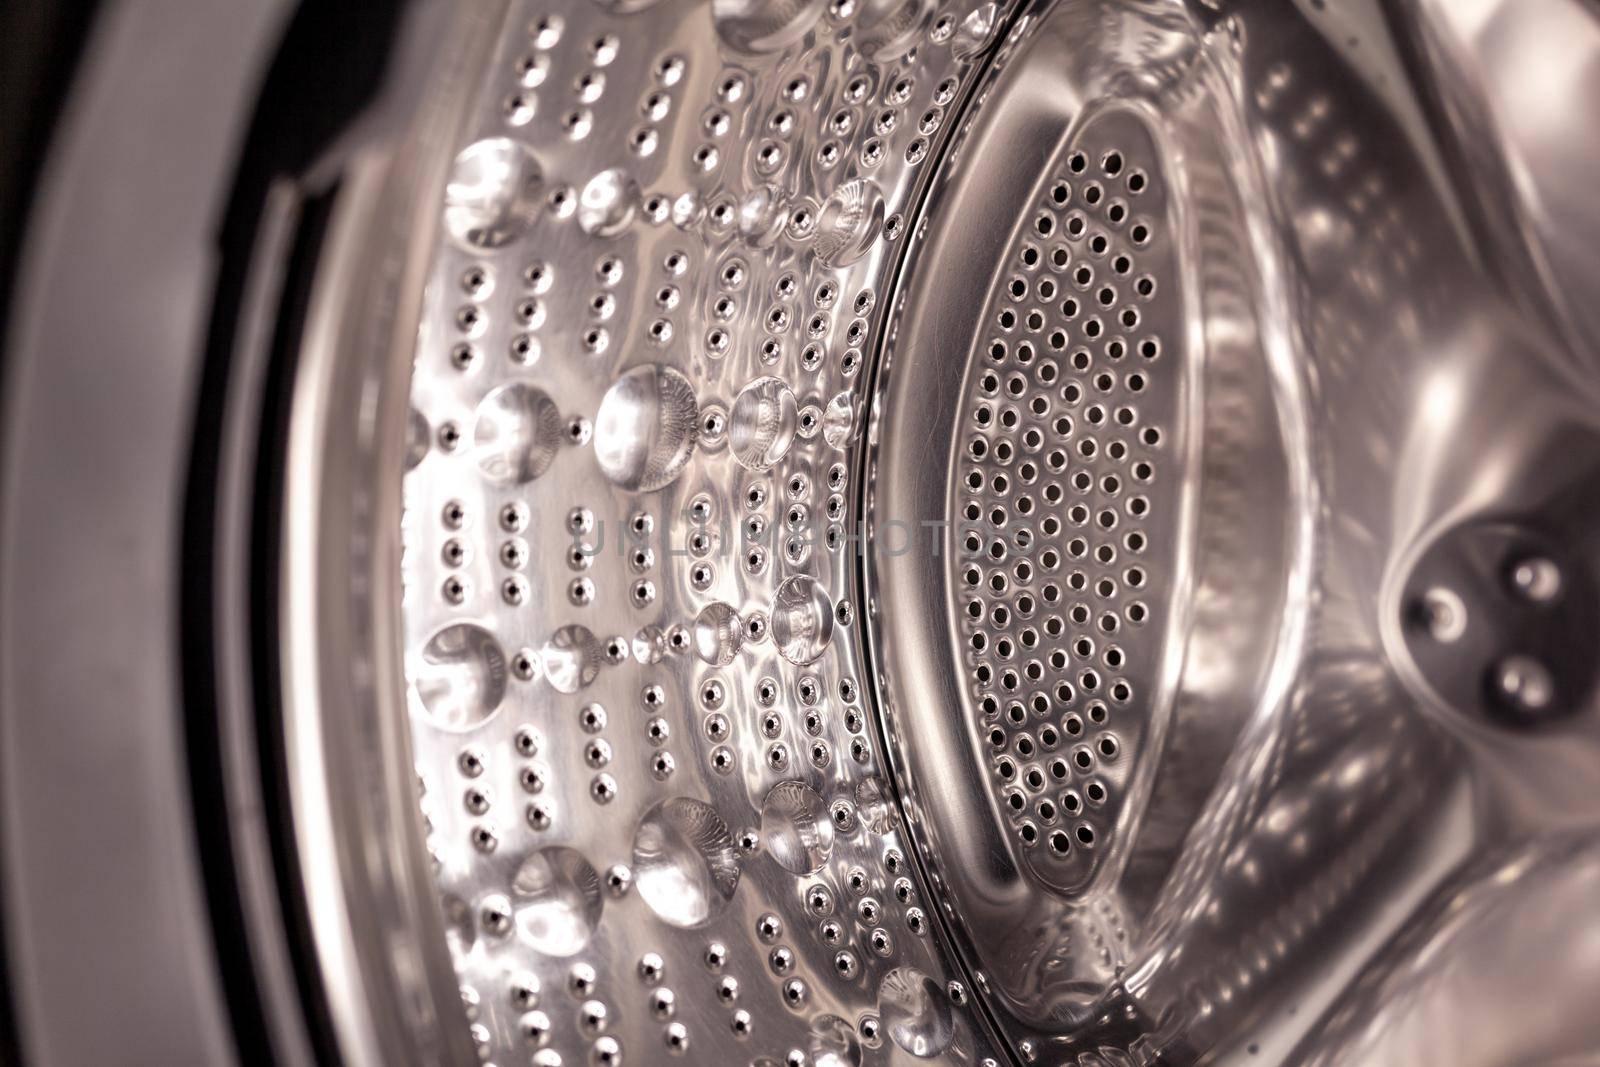 Drum of washing machine dry and clean close-up. Washing Dryer Machine inside view of a drum.